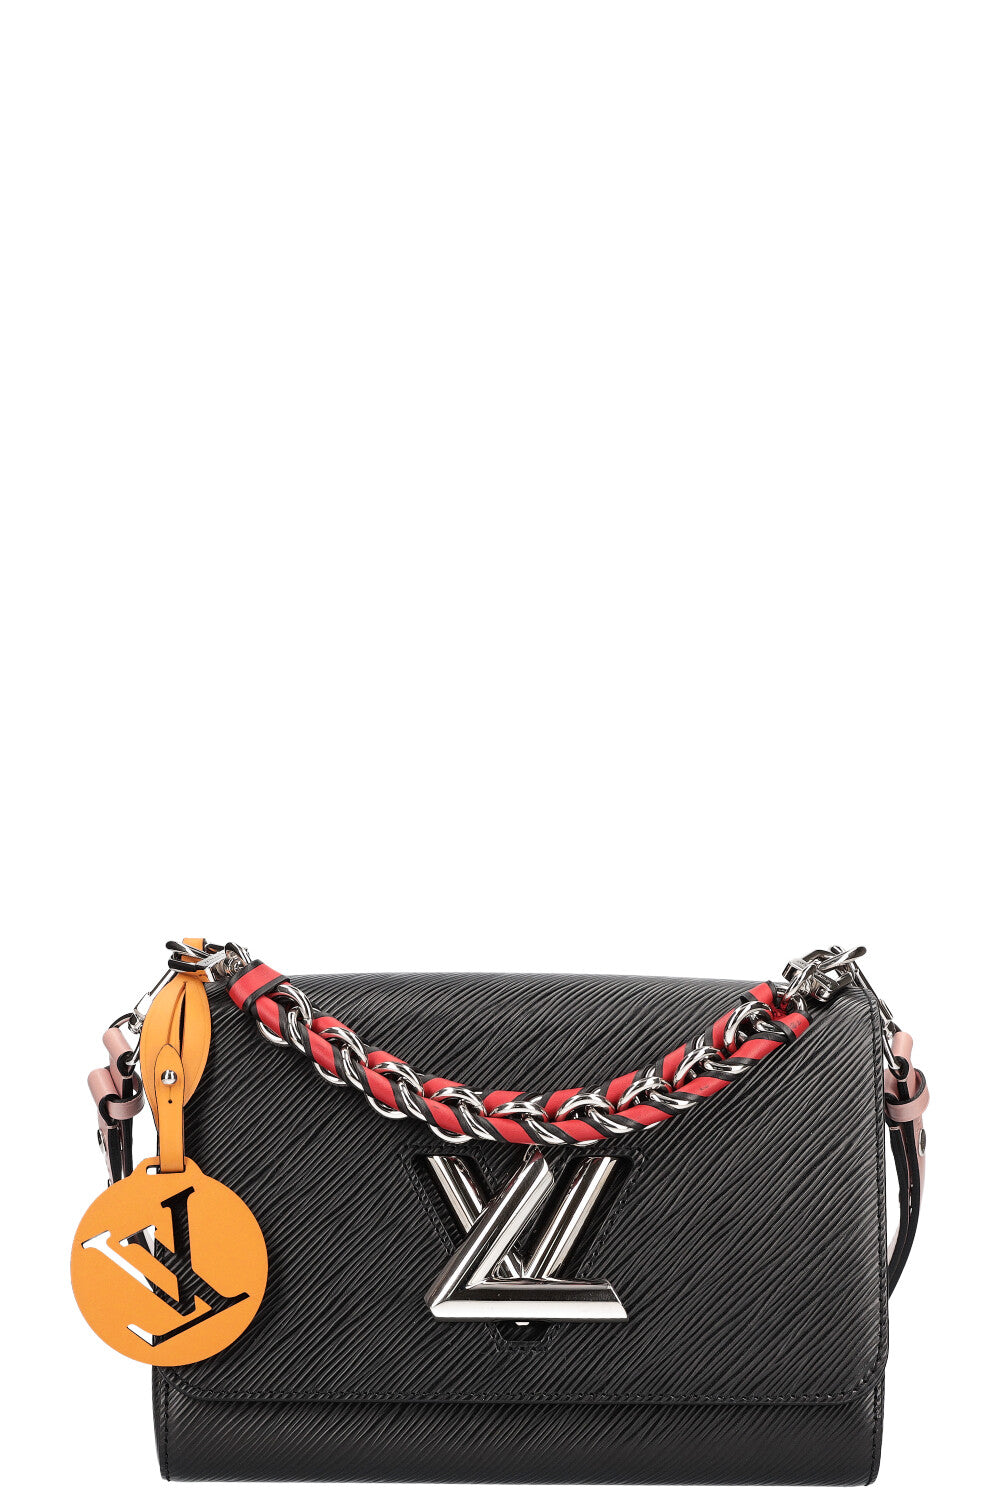 Louis Vuitton Updates Some of Its FanFavorite Bags with New Colorful Braided  Handles for Winter 2018  PurseBlog